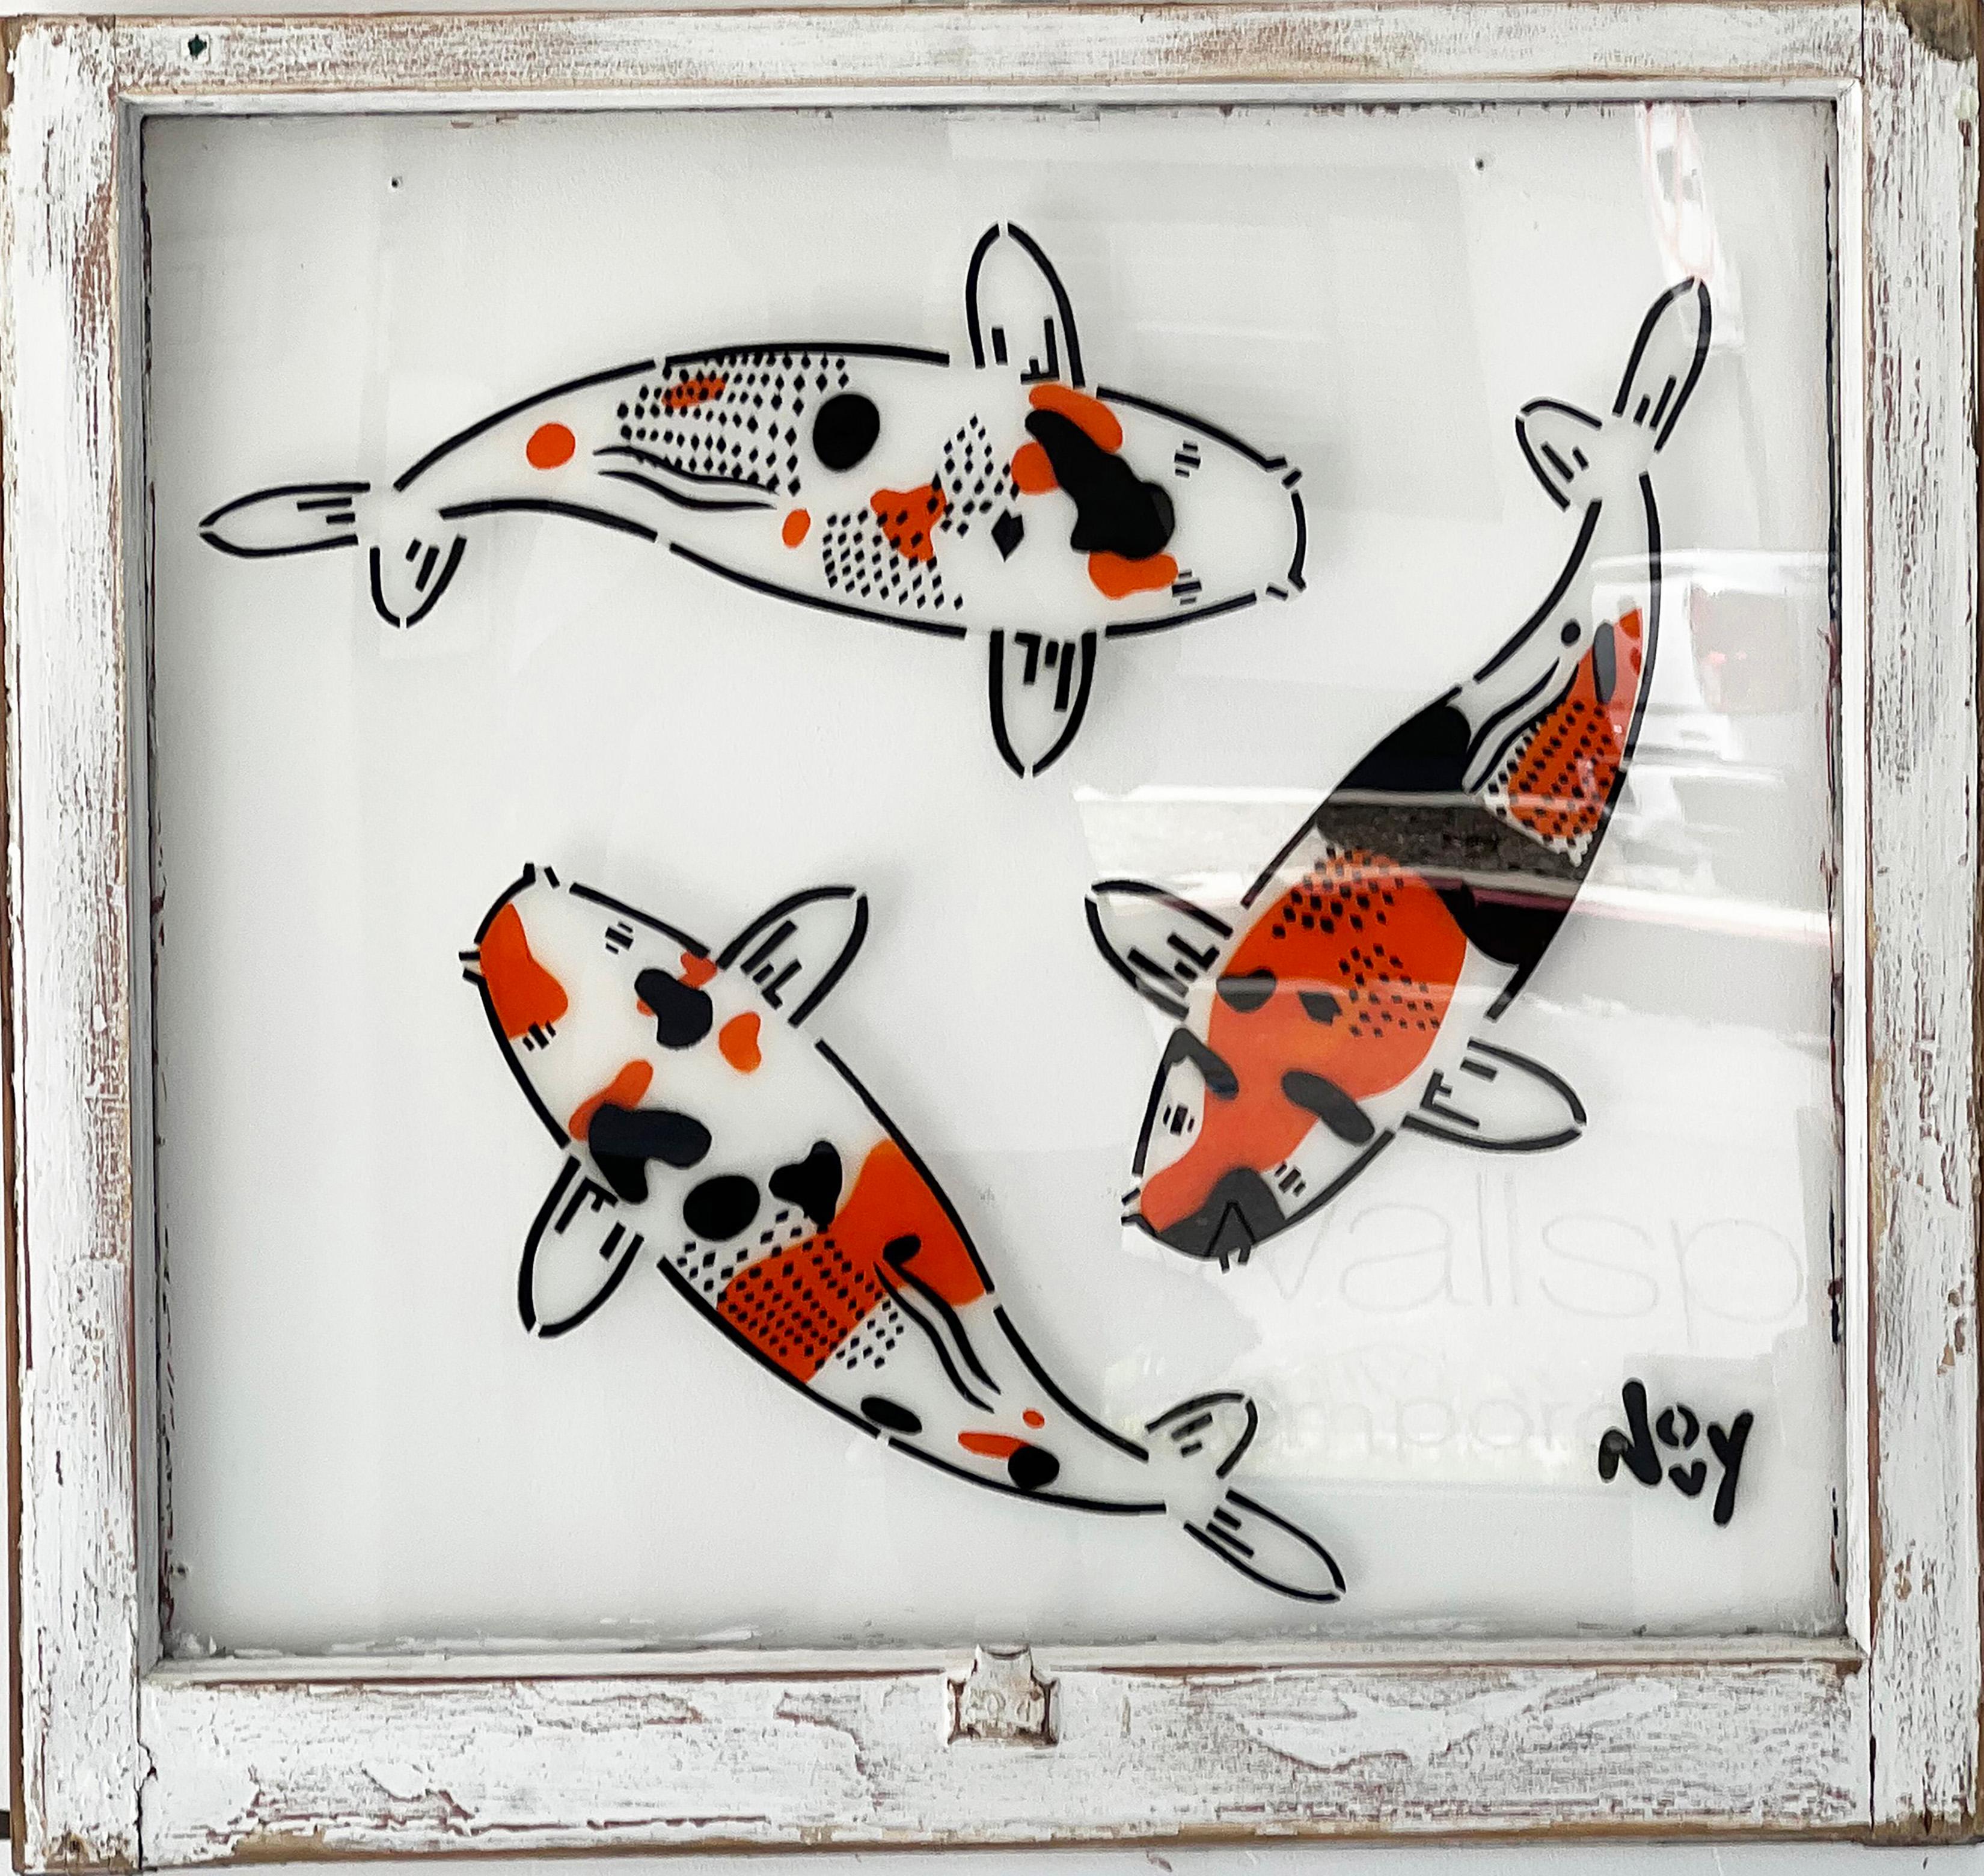 3 Koi spray painted stencil on white stained wood window frame